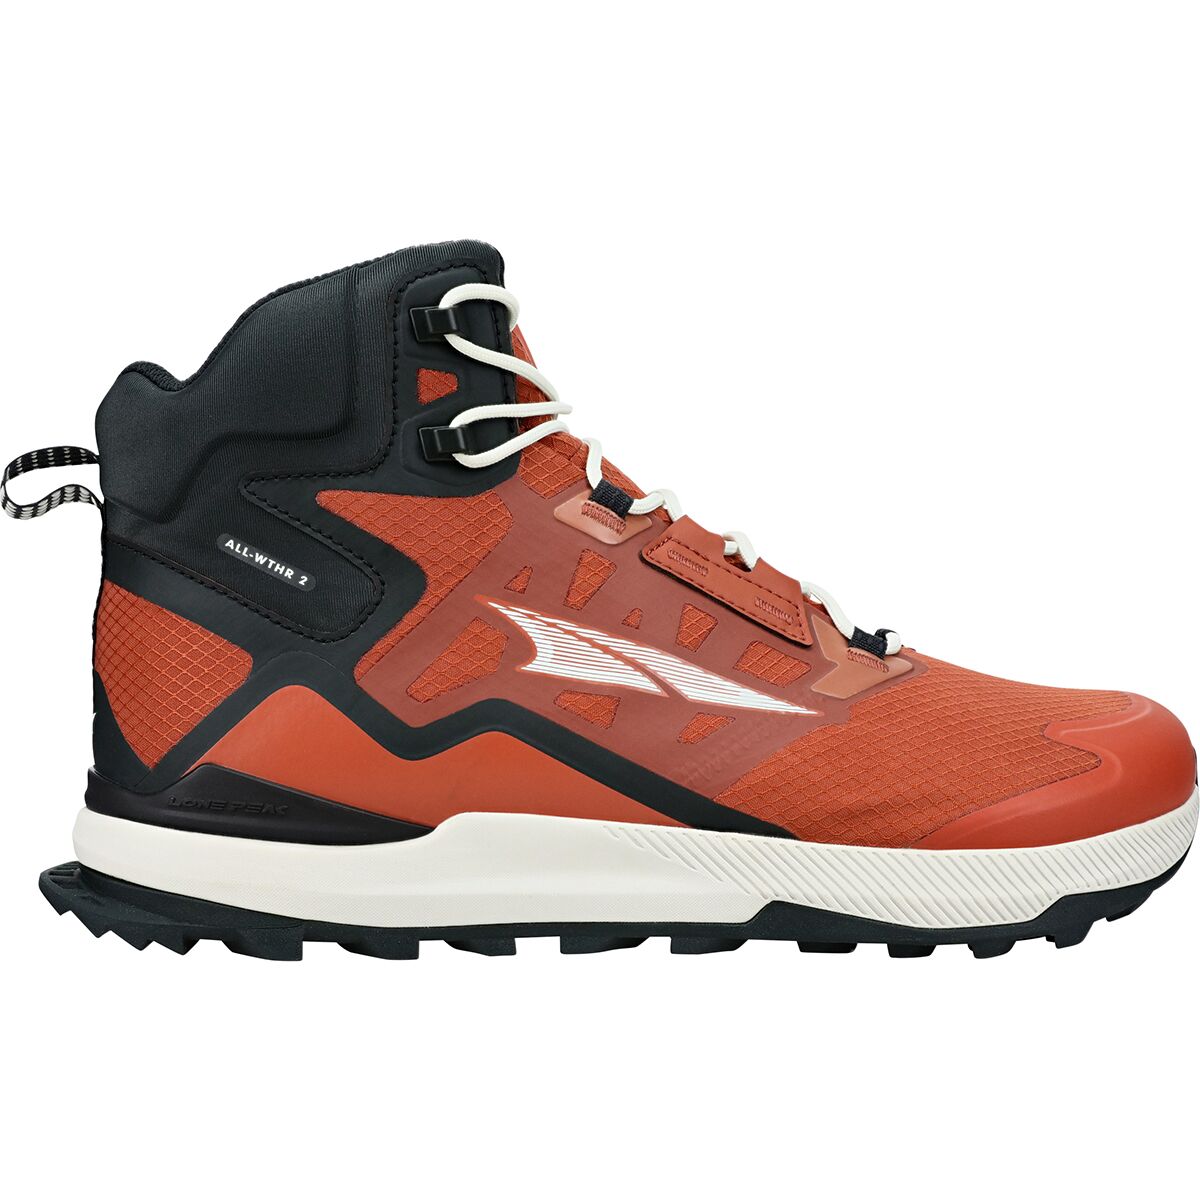 Men's Hiking & Backpacking Boots | Backcountry.com